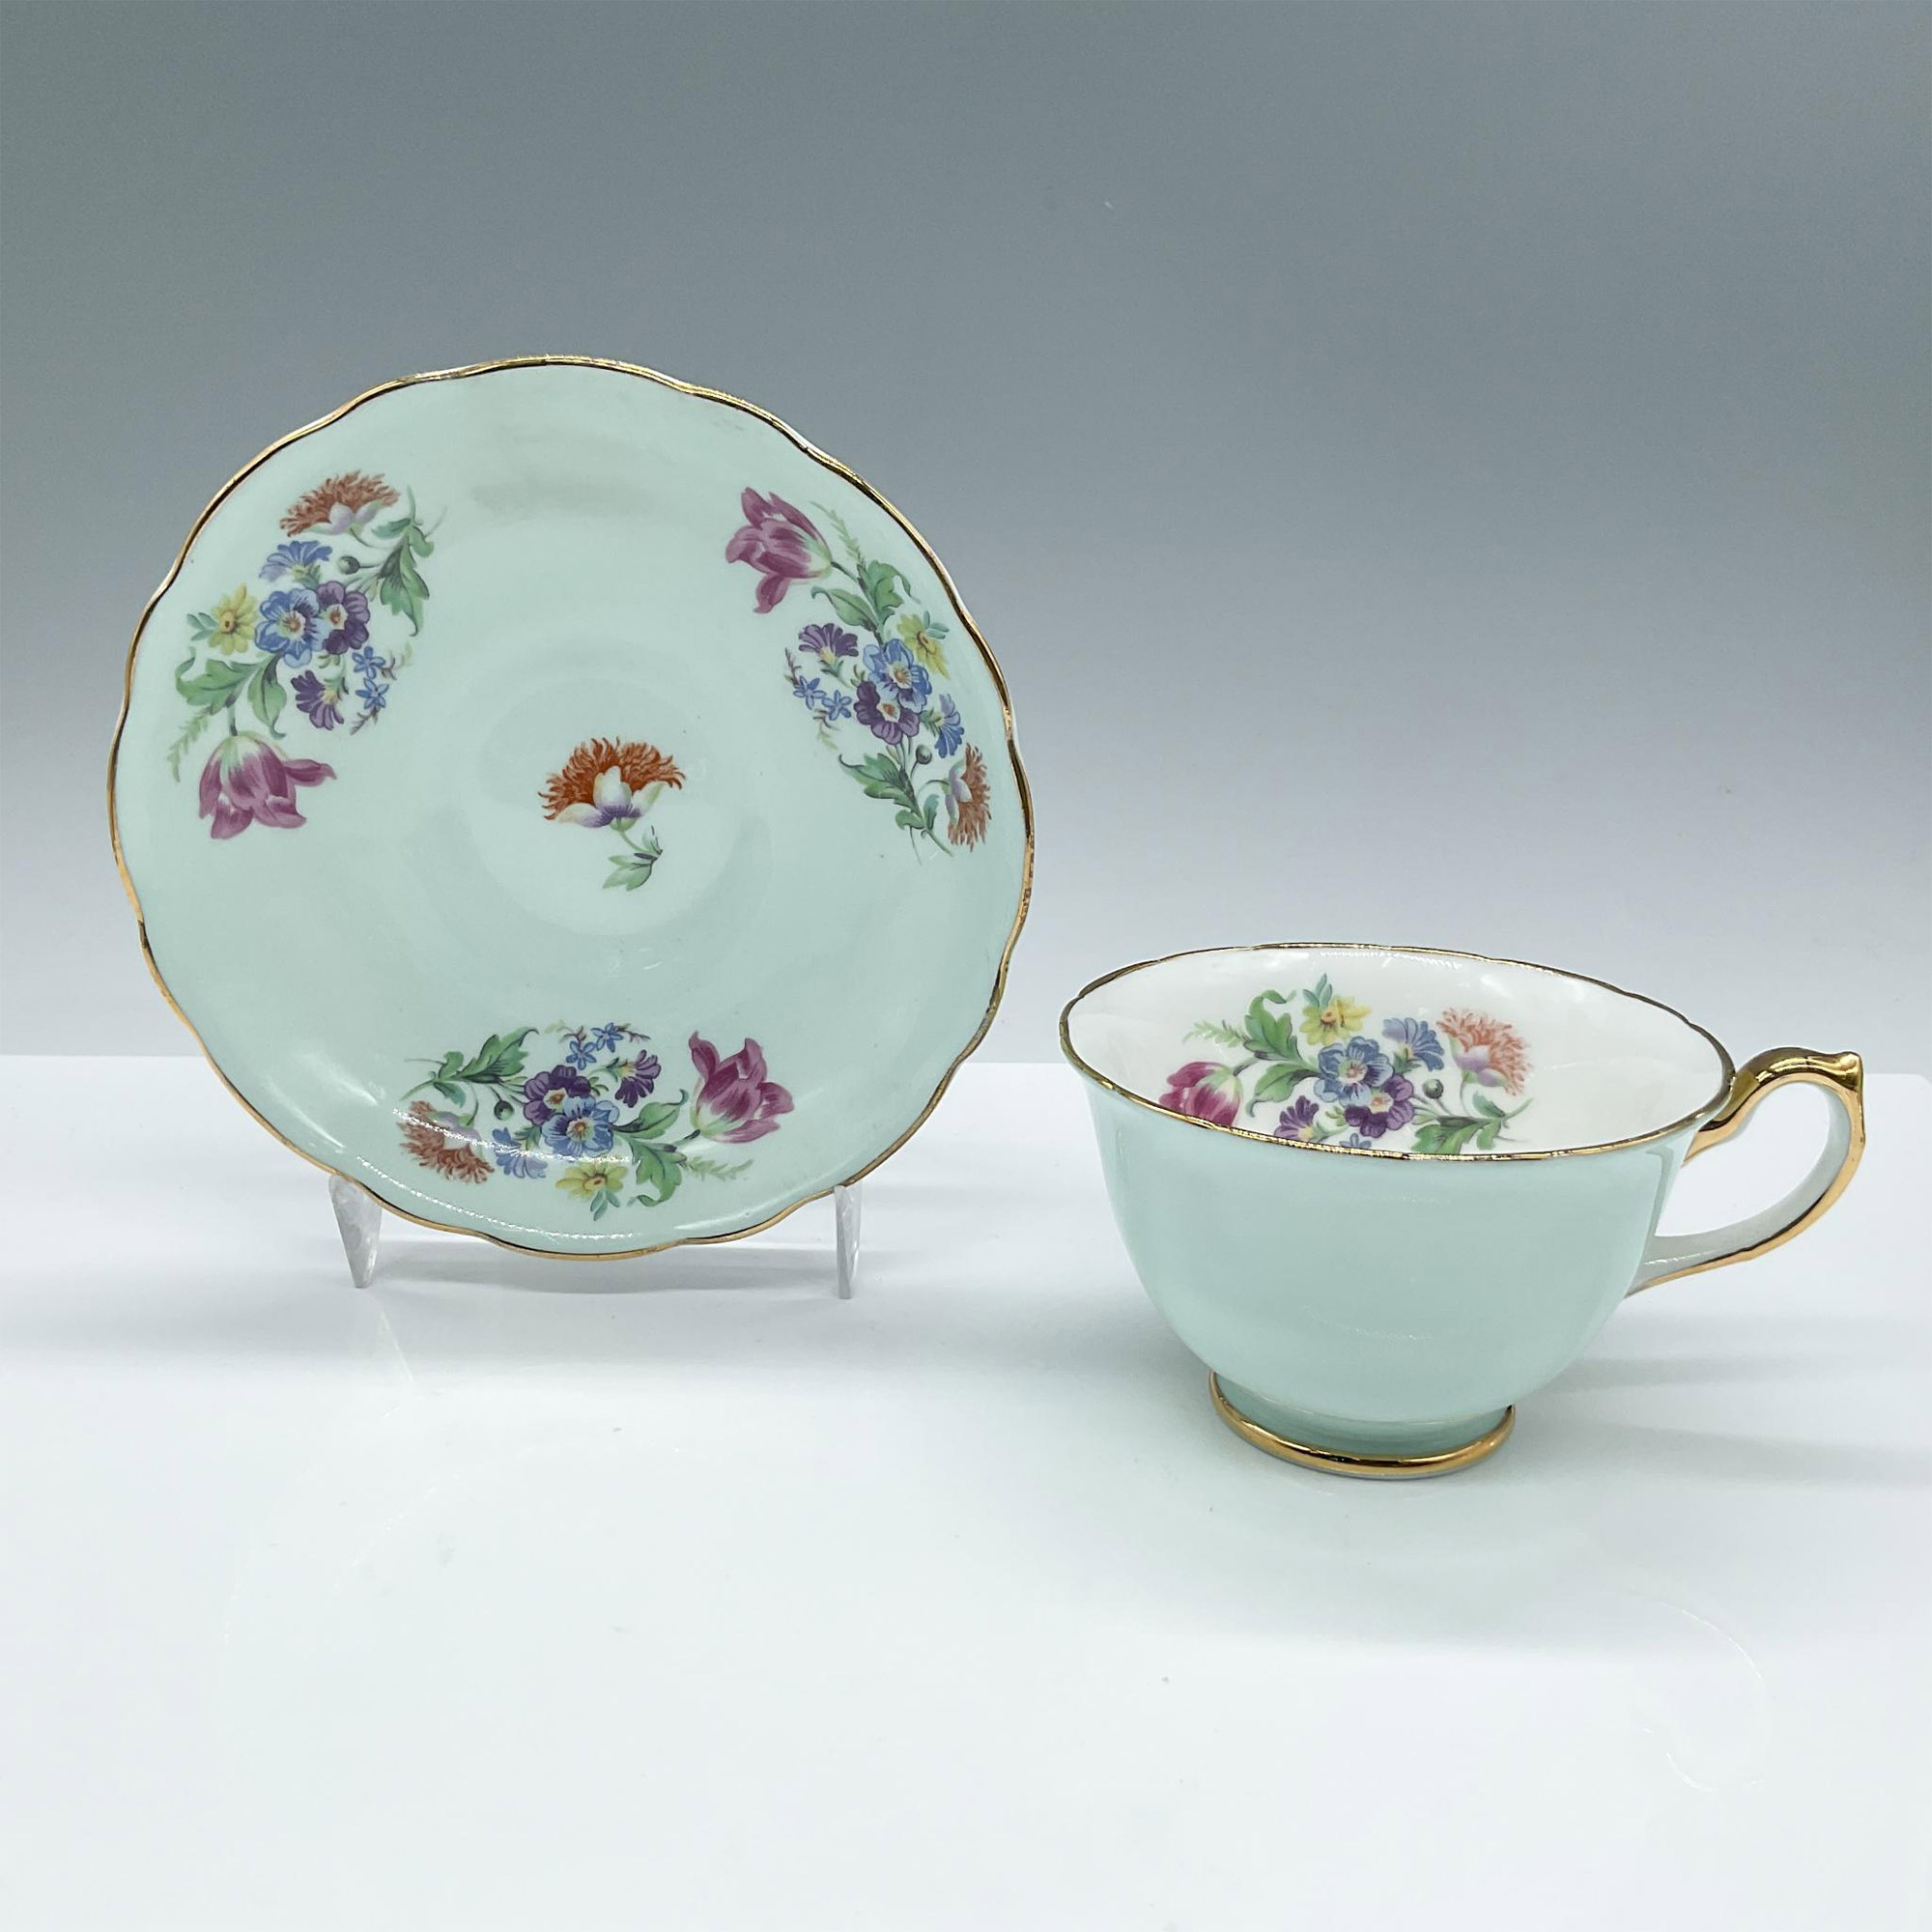 Hammersley & Co Bone China Tea Cup and Saucer Set - Image 3 of 5